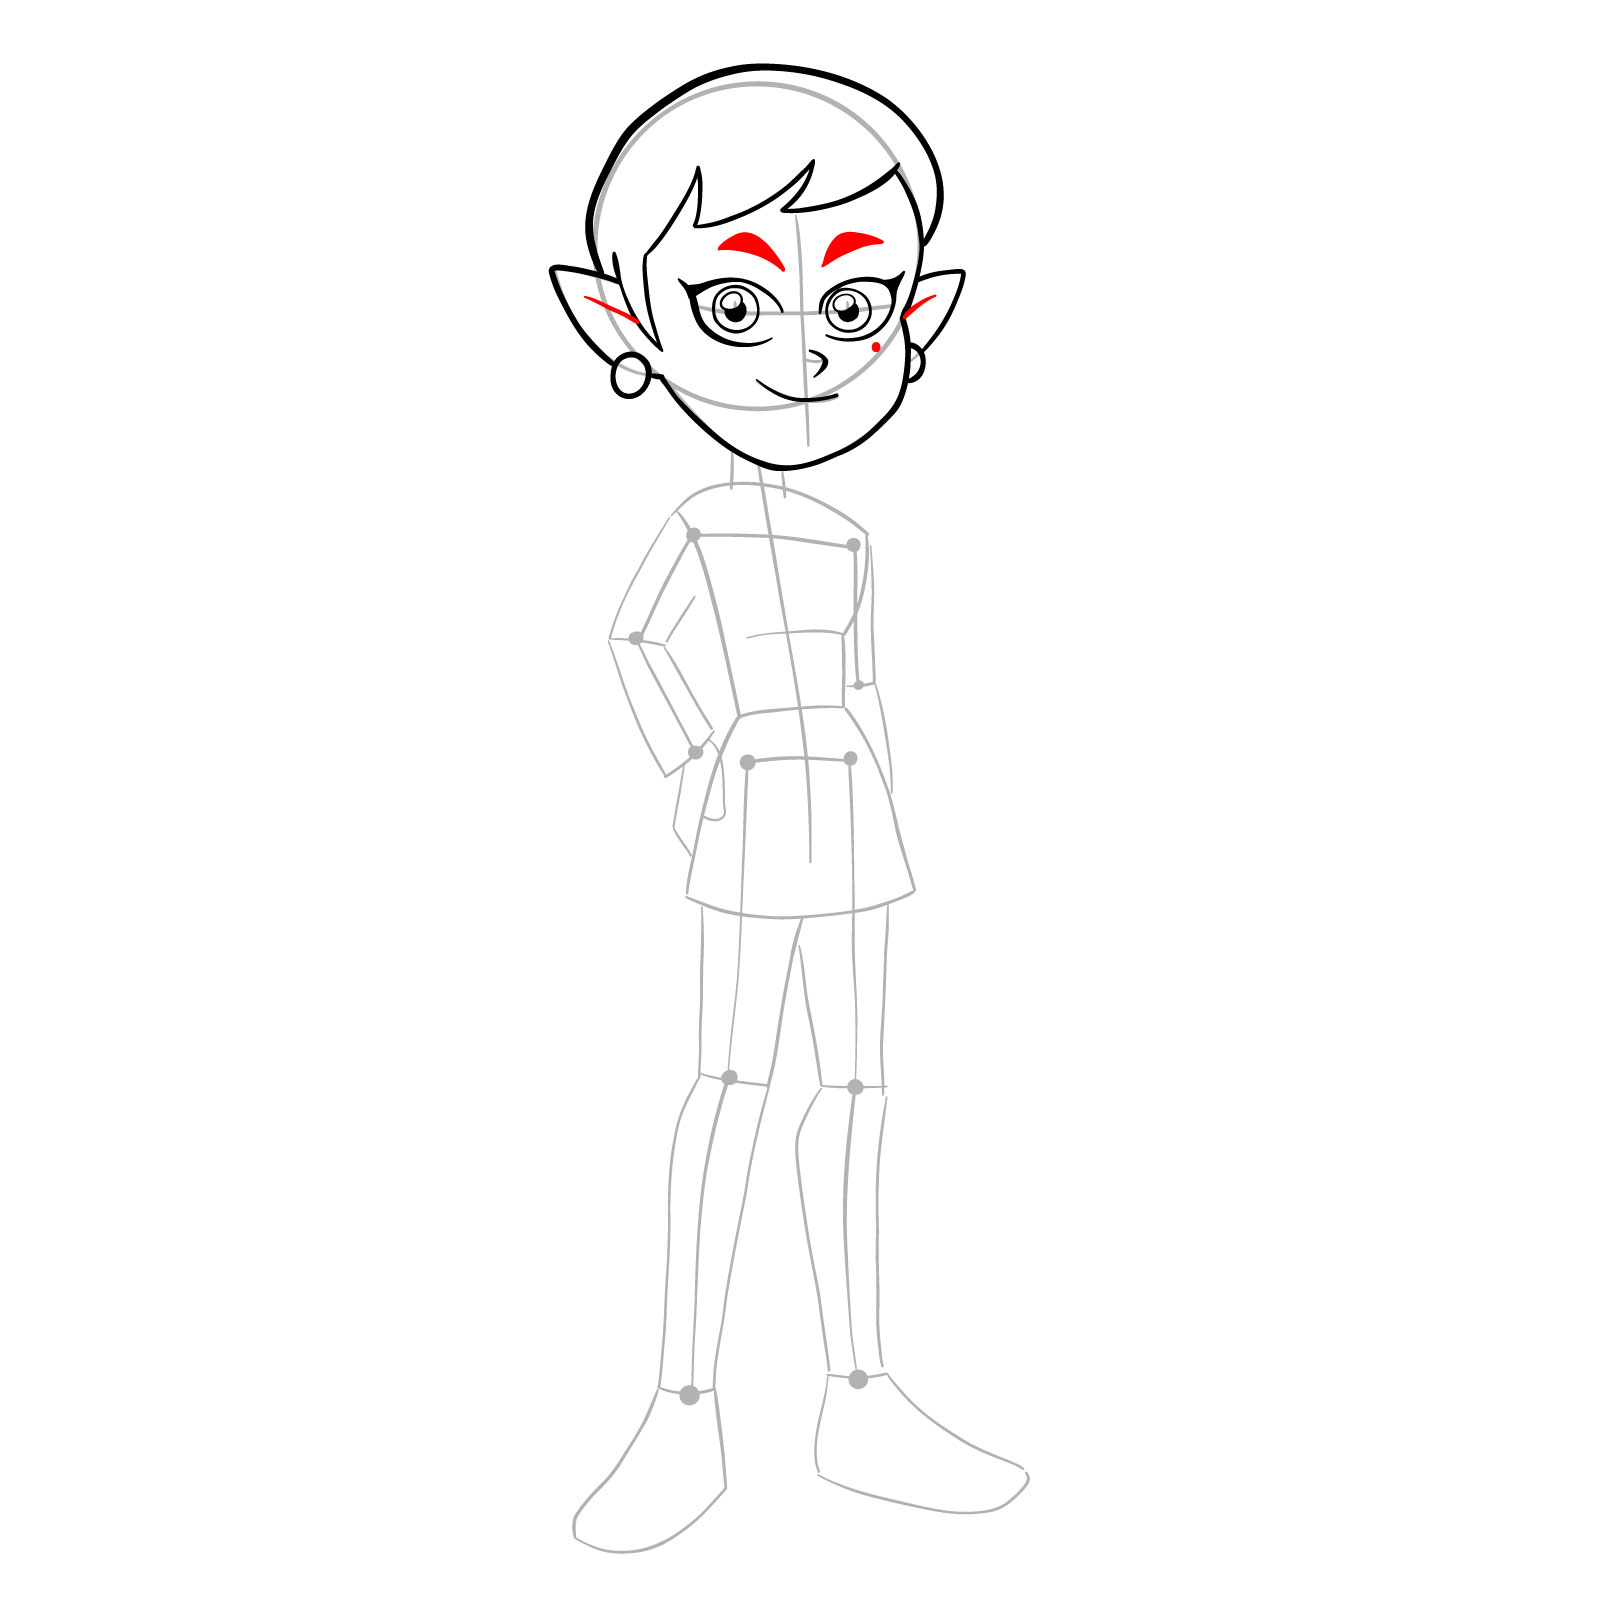 How to draw Emira Blight from The Owl House - step 12